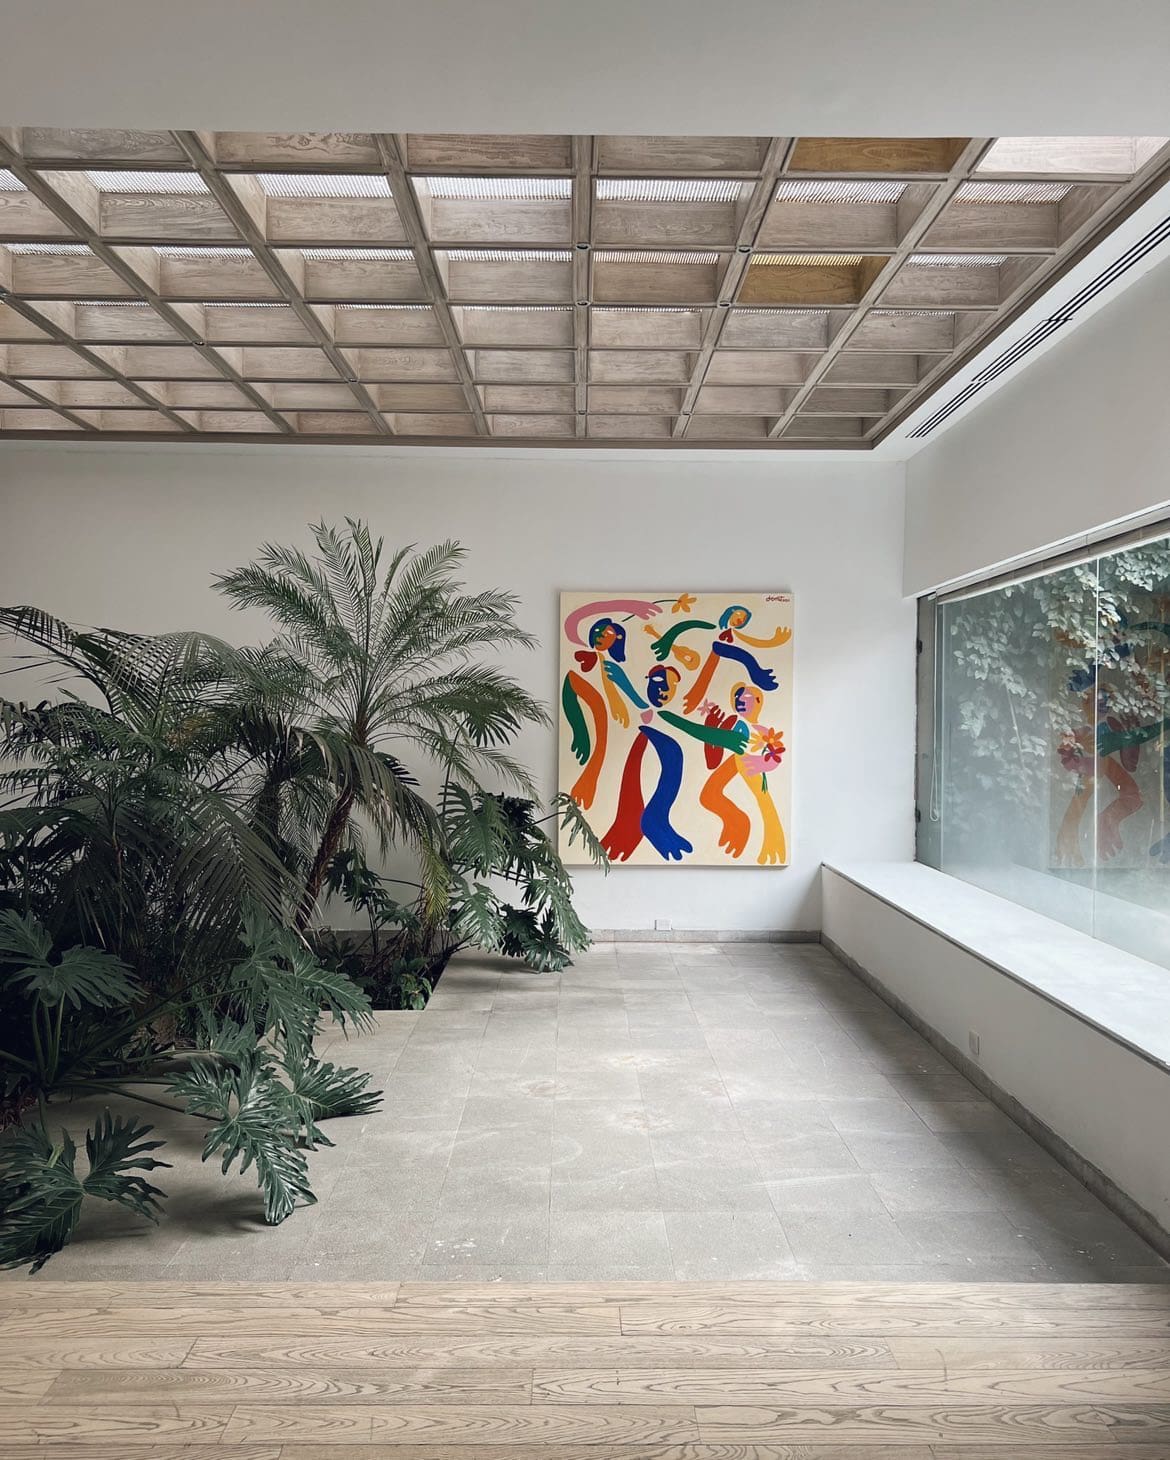 The best art galleries and museums in Mexico City | Inside JO-HS gallery, where leafy plants contrast with a concrete floor and white walls, and a painted work of art is on display on a wall.